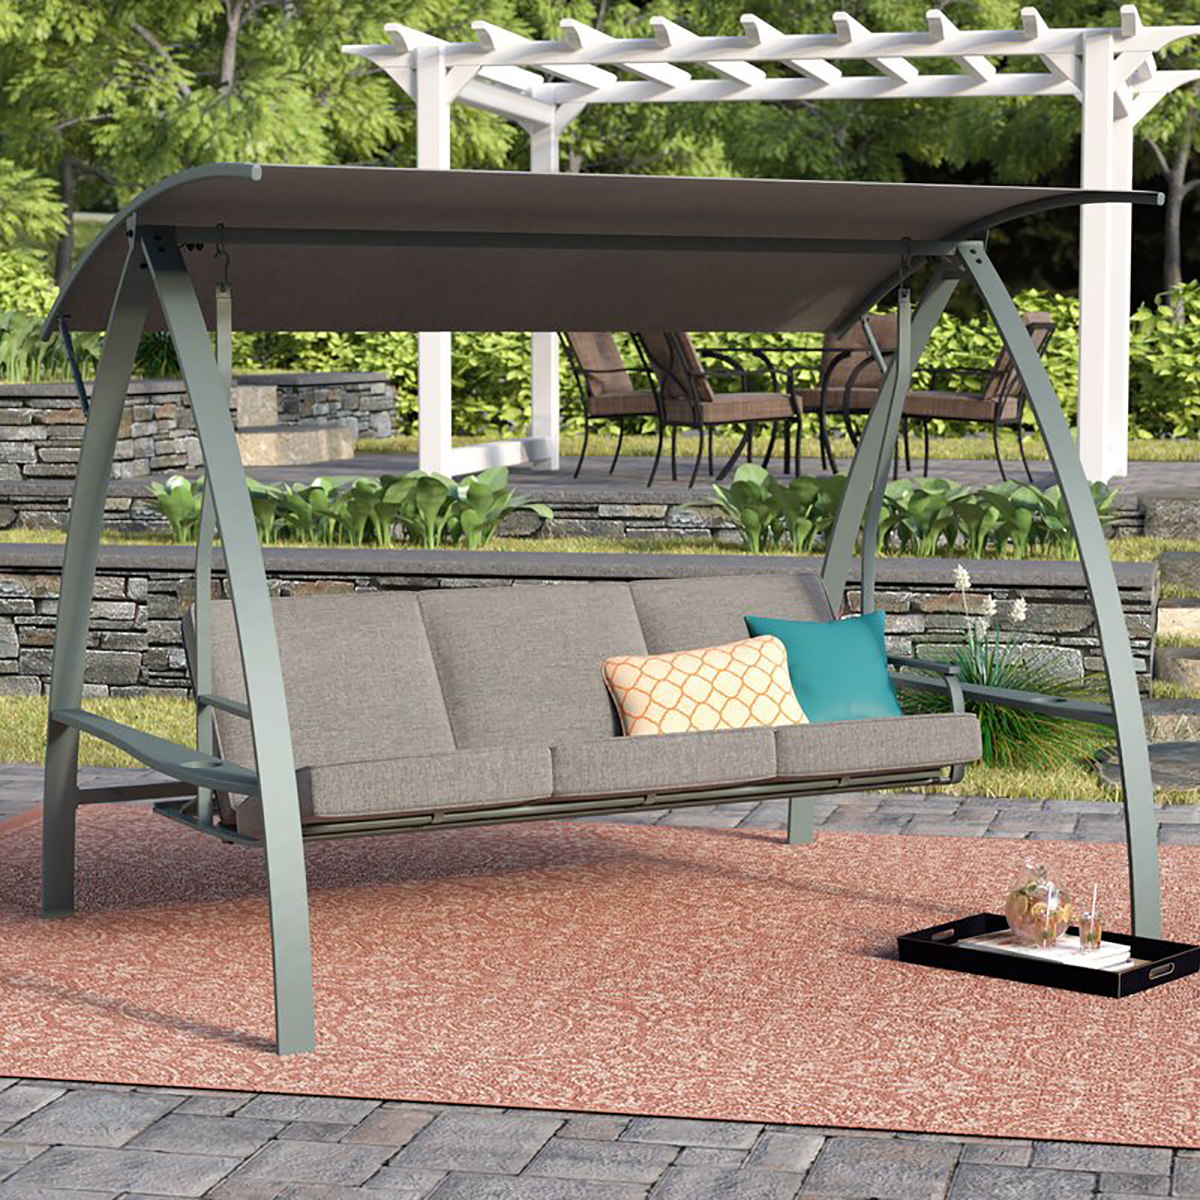 Arlmont u0026 Co. Meiman Porch Swing With Canopy